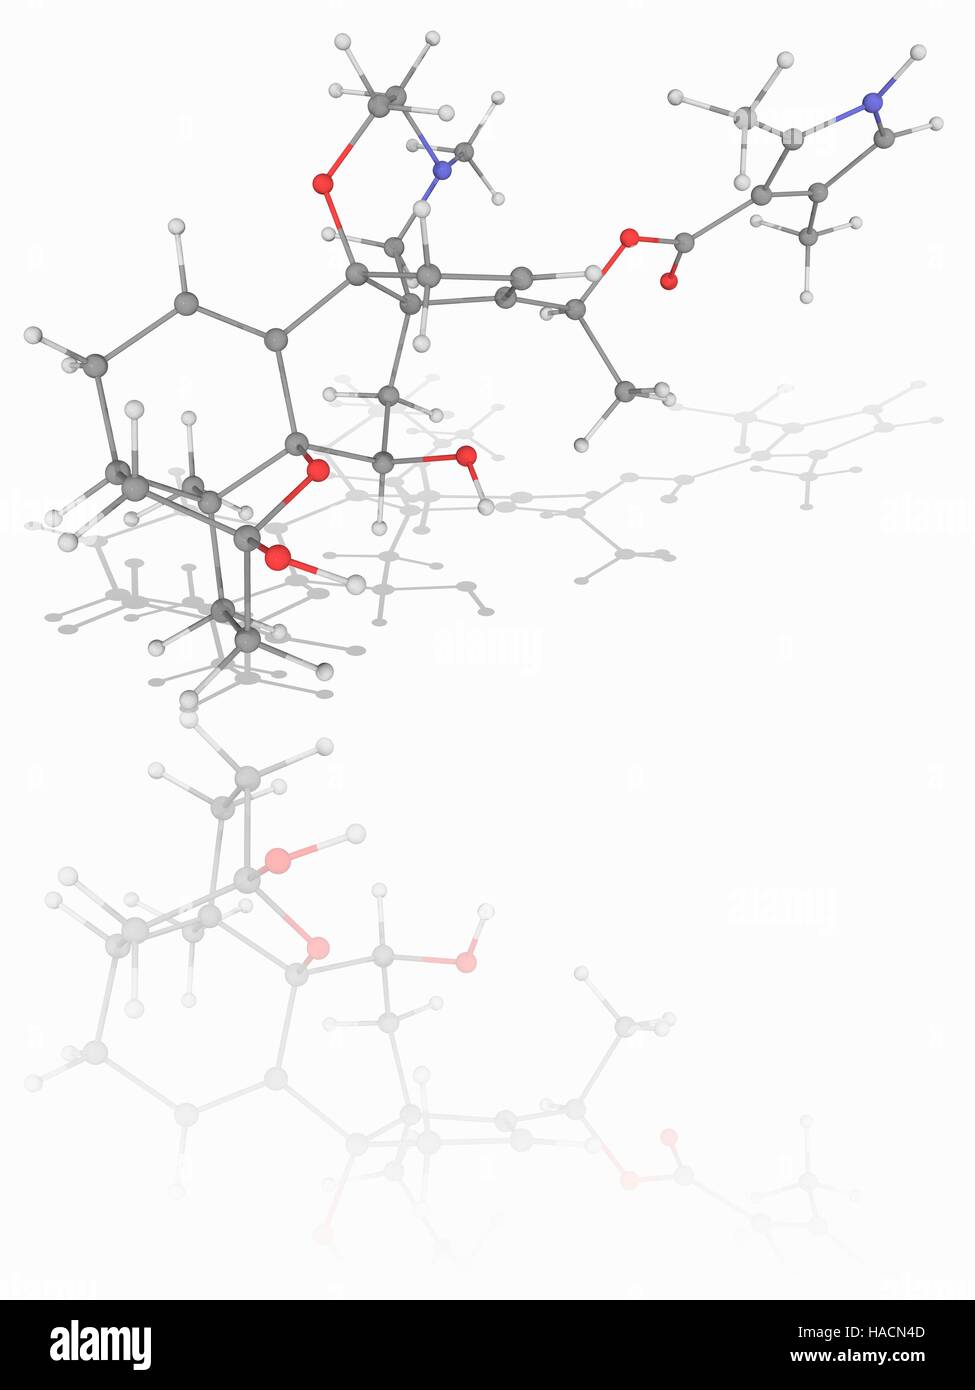 Batrachotoxin. Molecular model of the alkaloid batrachotoxin (C31.H42.N2.O6), a cardiotoxic and neurotoxic chemical found in poison dart frogs. Atoms are represented as spheres and are colour-coded: carbon (grey), hydrogen (white), nitrogen (blue) and oxygen (red). Illustration. Stock Photo